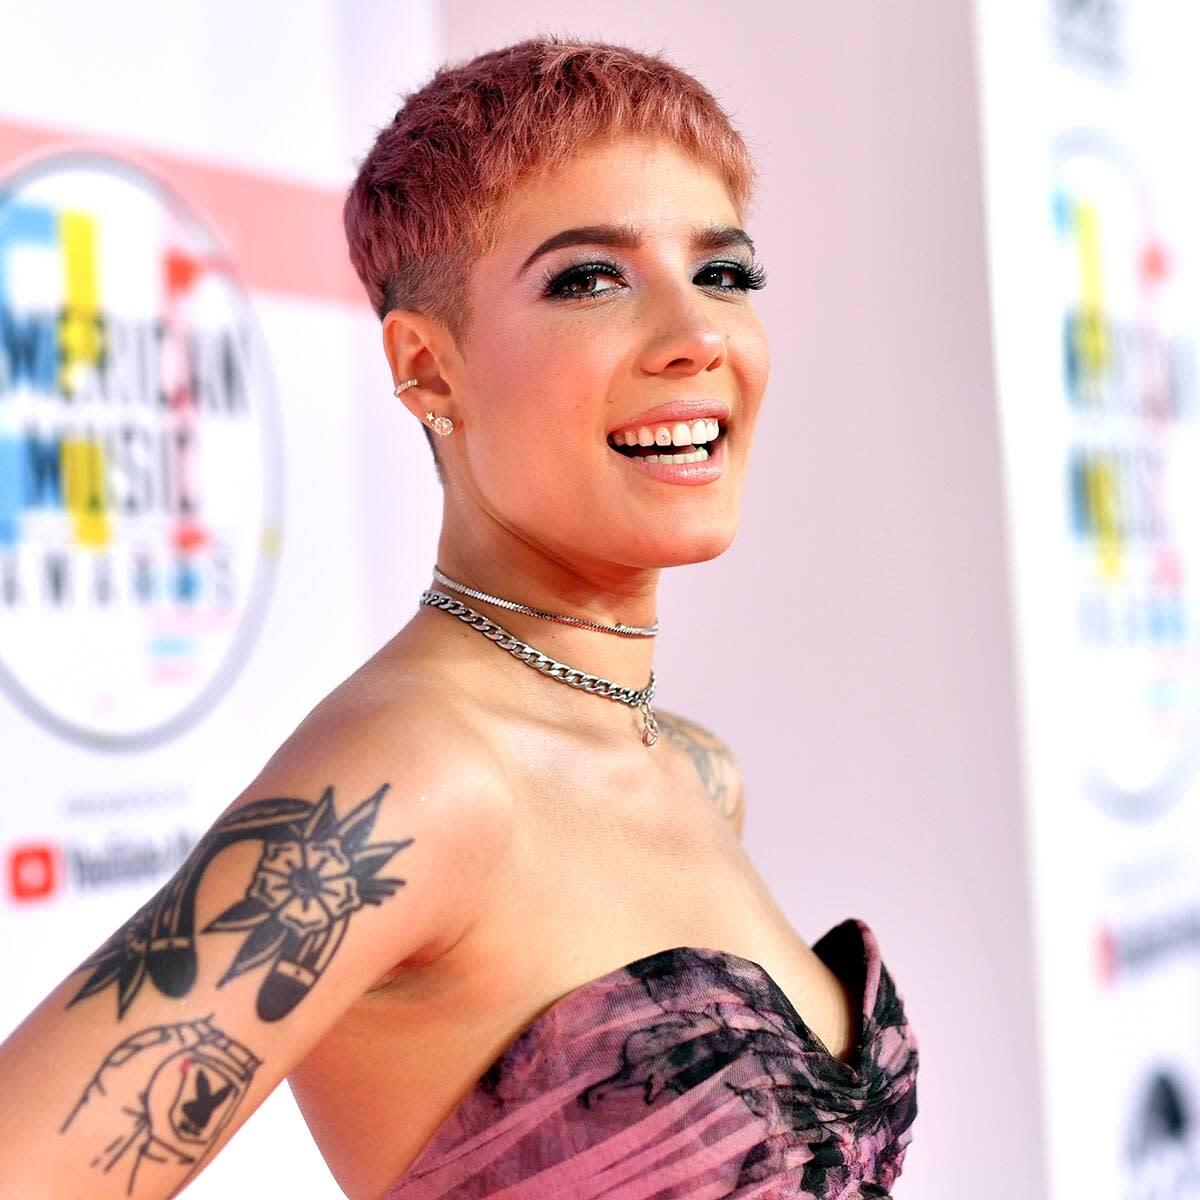 Halsey details how pregnancy impacted her body image and gender perception “totally”